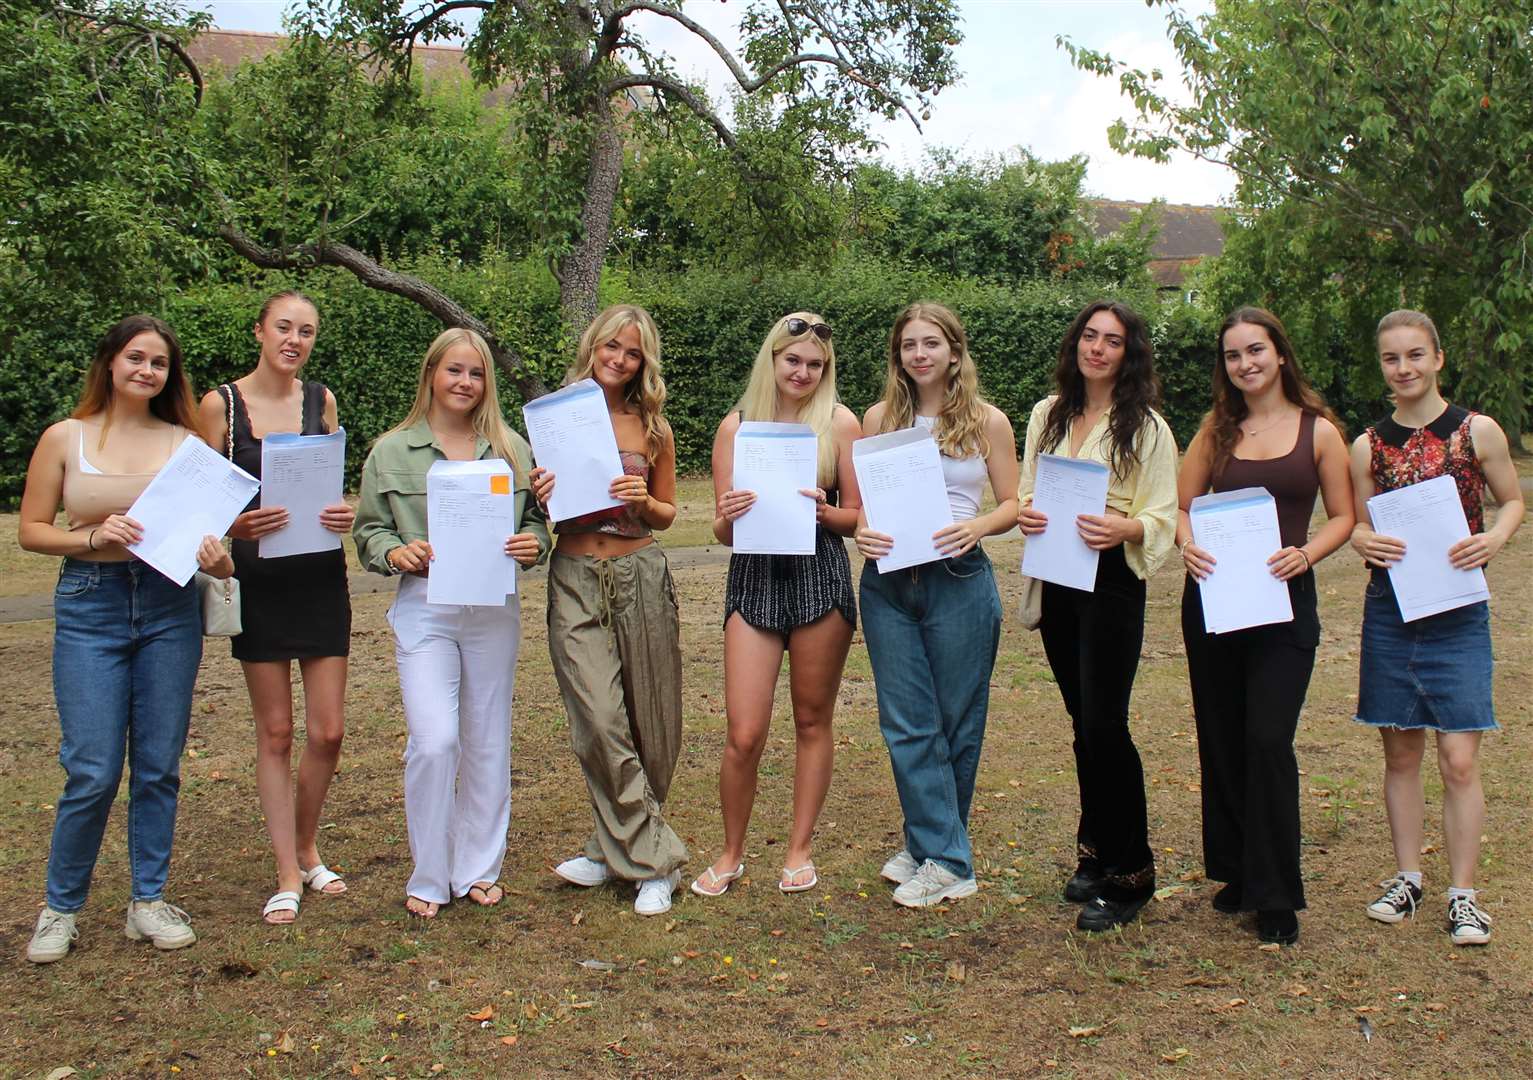 Some of the Highsted grammar students who helped the Sittingbourne school achieve record results